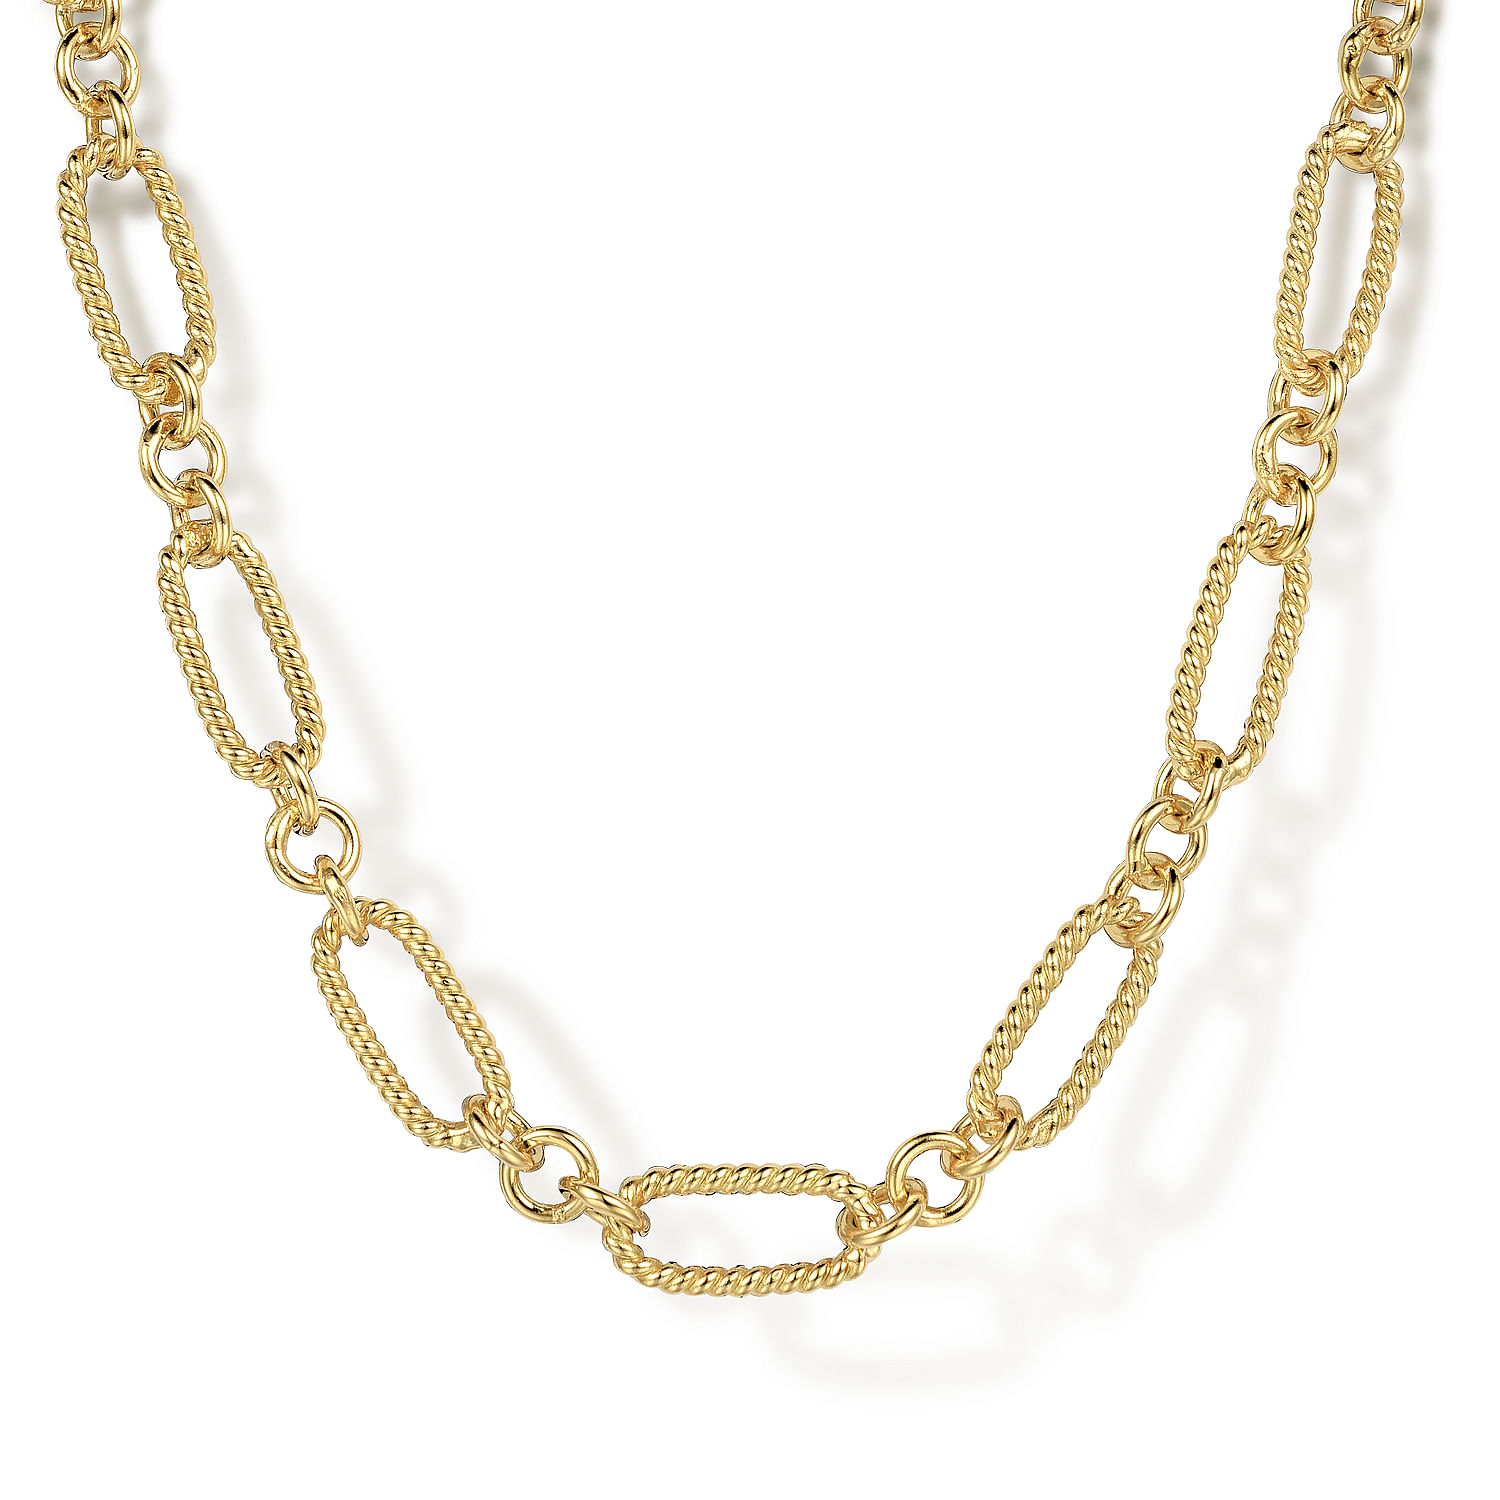 24 inch 14K Yellow Gold Necklace